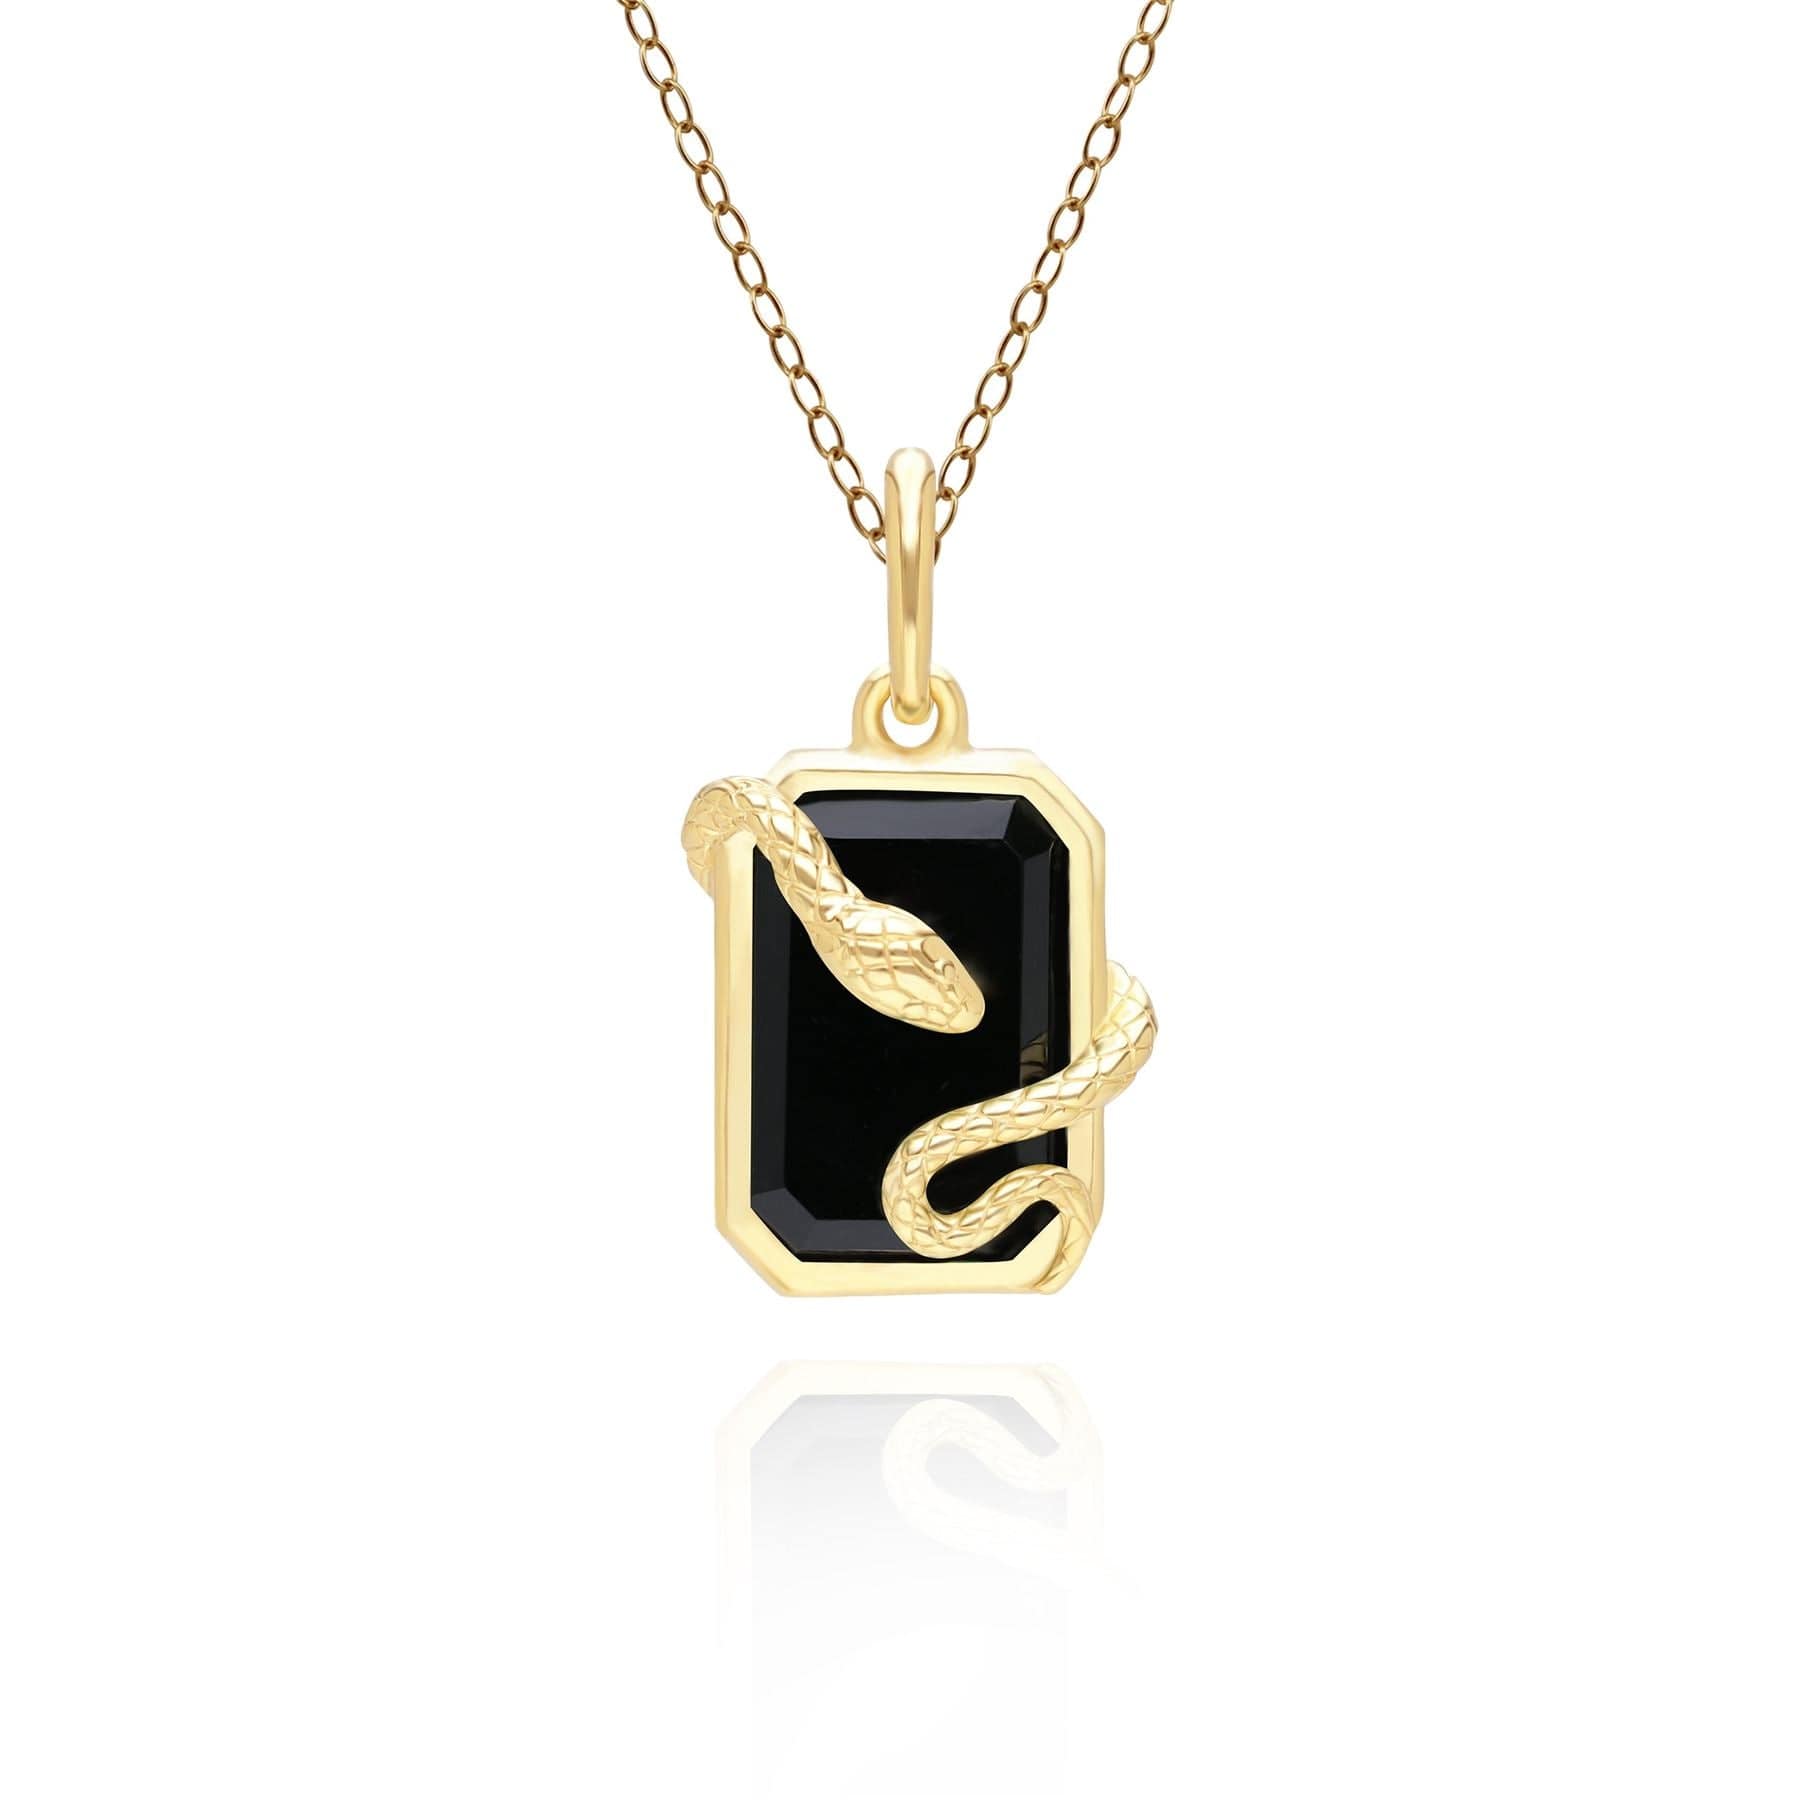 Grand Deco Black Onyx Snake Wrap Pendant in Gold Plated Sterling Silver - Gemondo